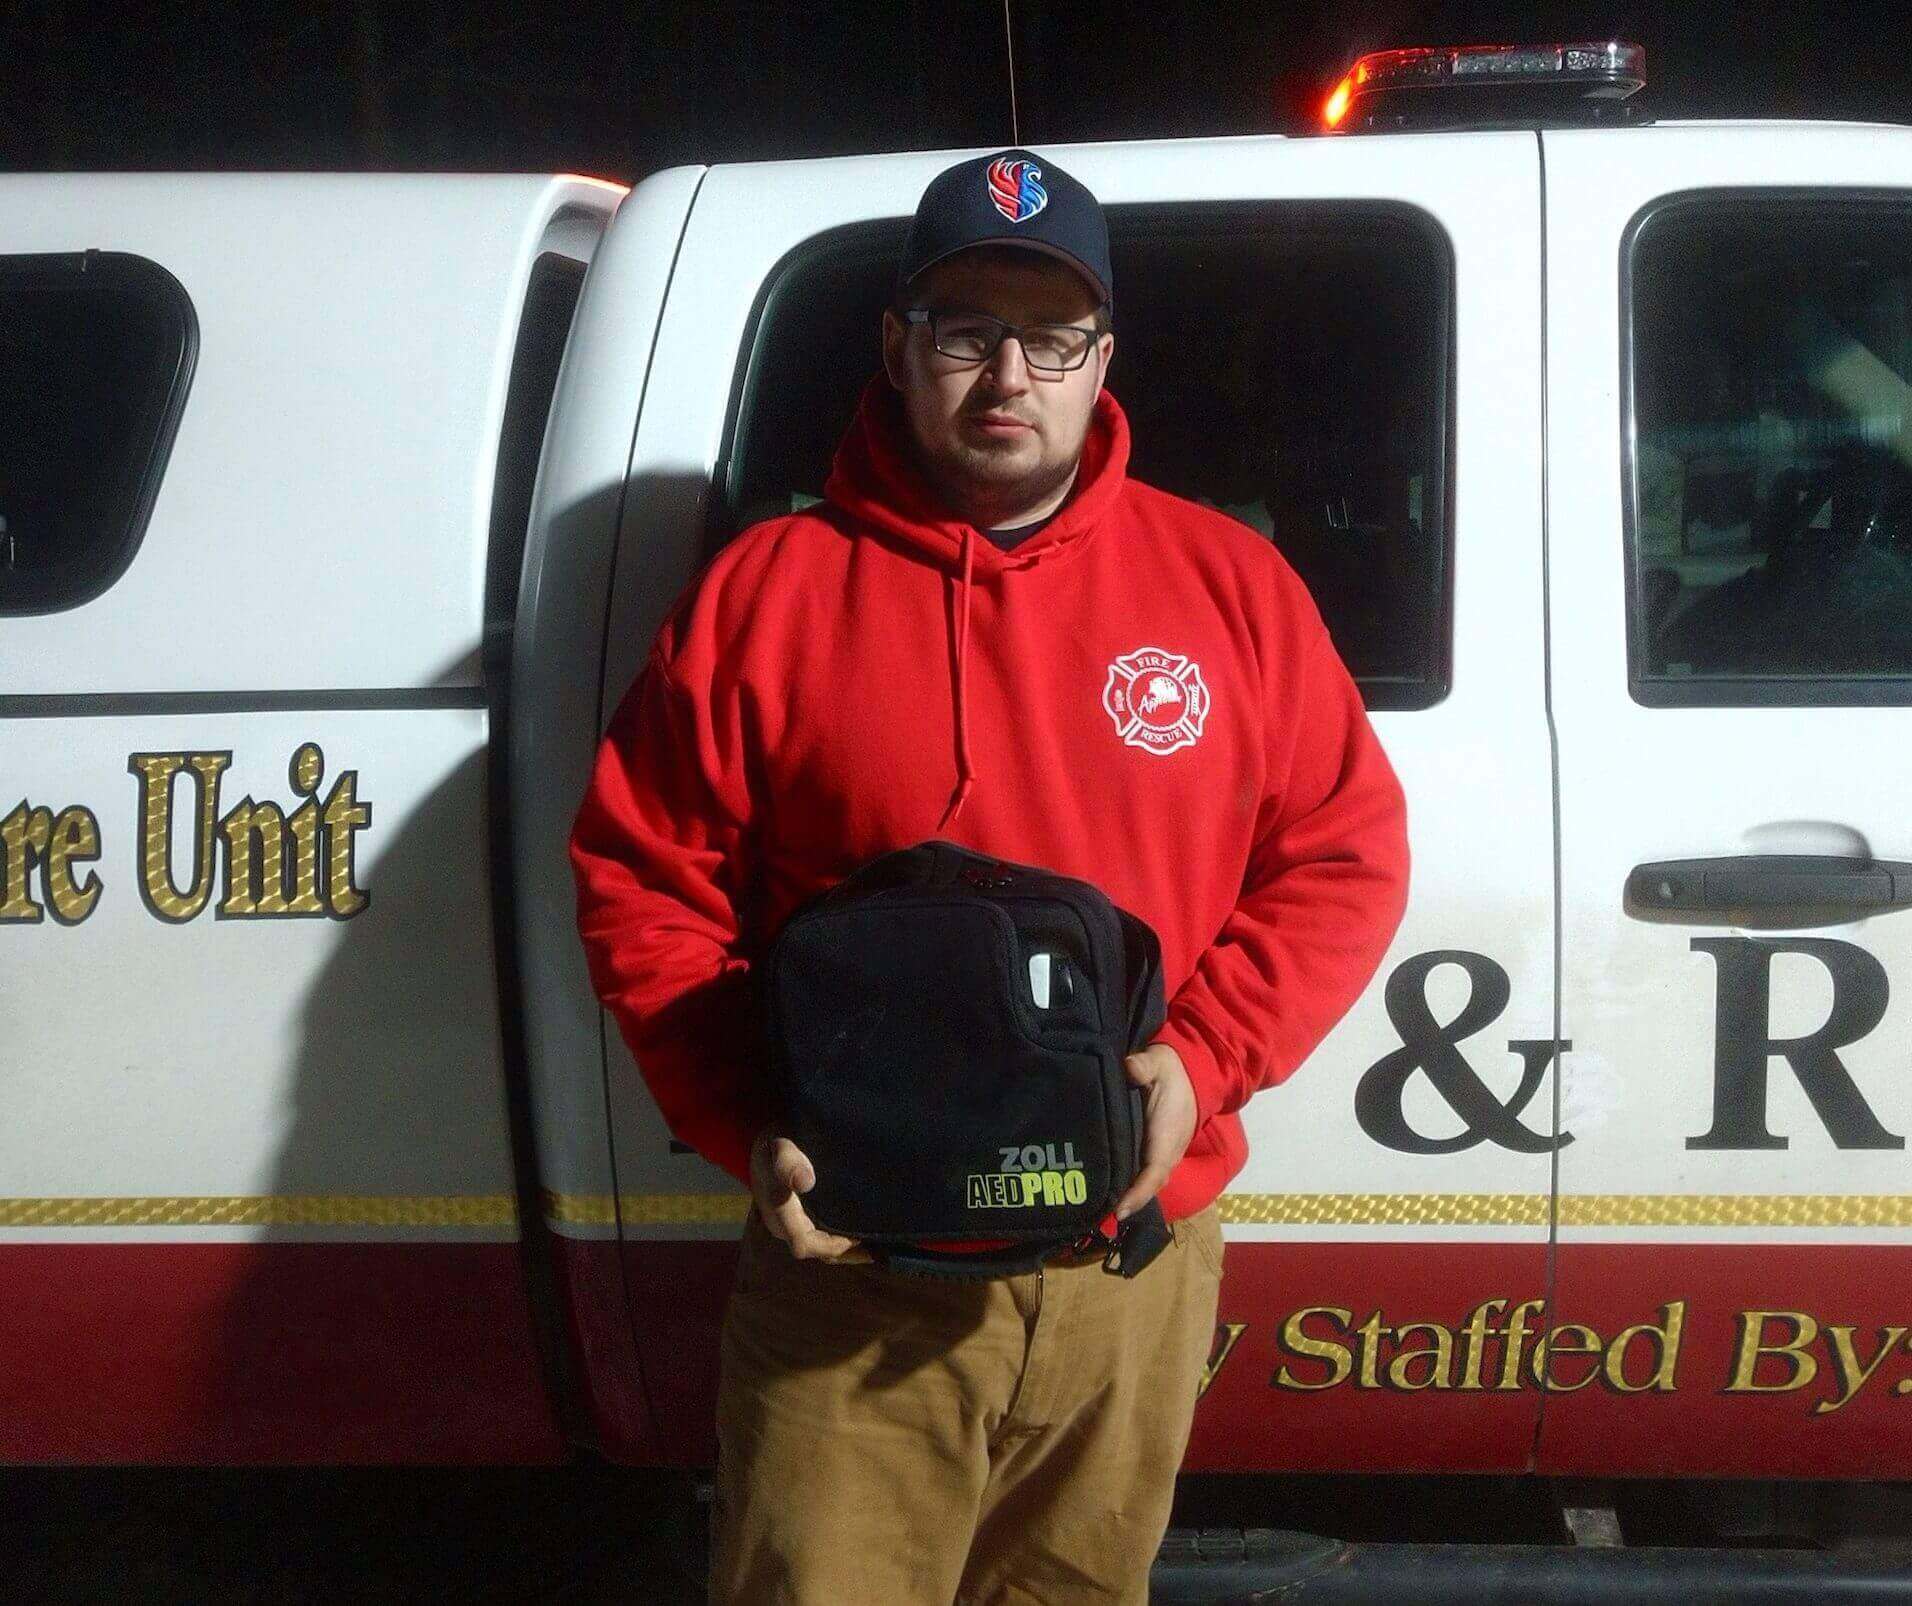 Brandon Tegen of White Lake Fire Department, AED.us giveaway winners